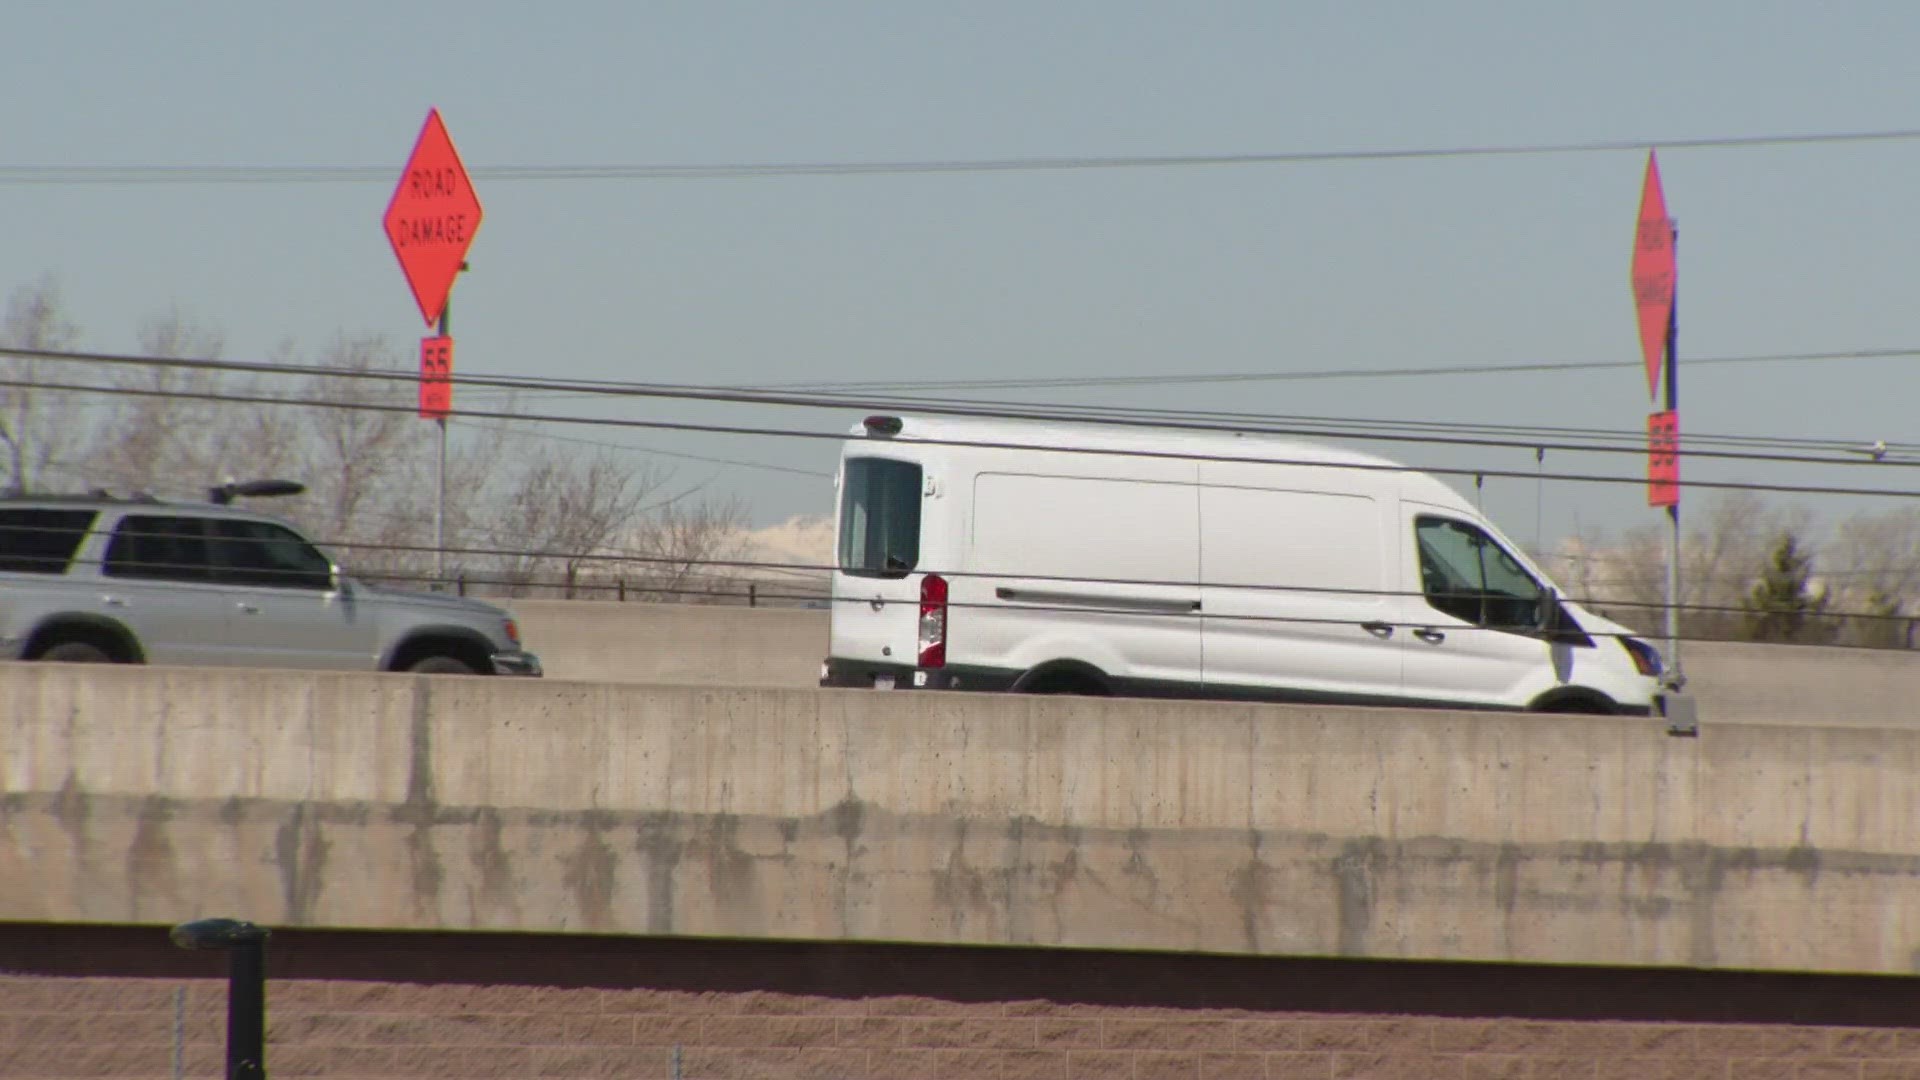 In less than a year, at least seven people have died in traffic crashes on I-225 between Second and Alameda avenues.